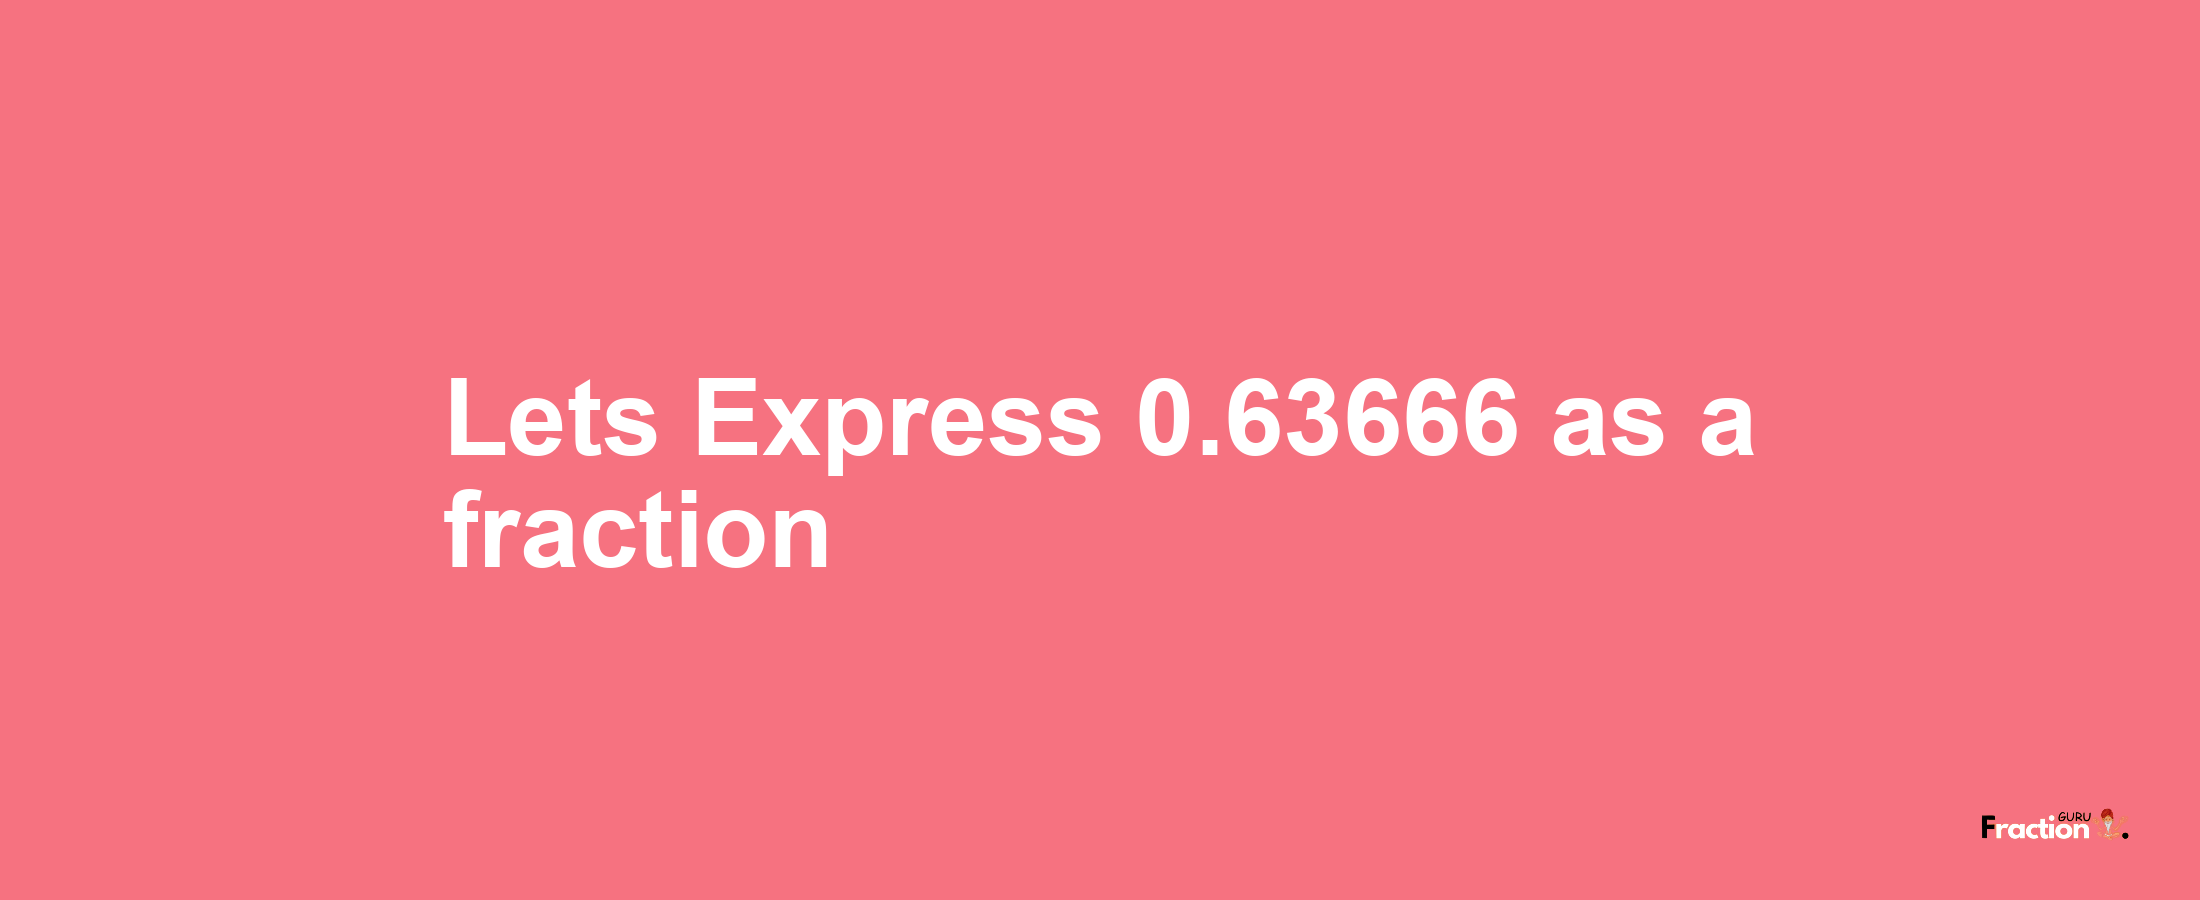 Lets Express 0.63666 as afraction